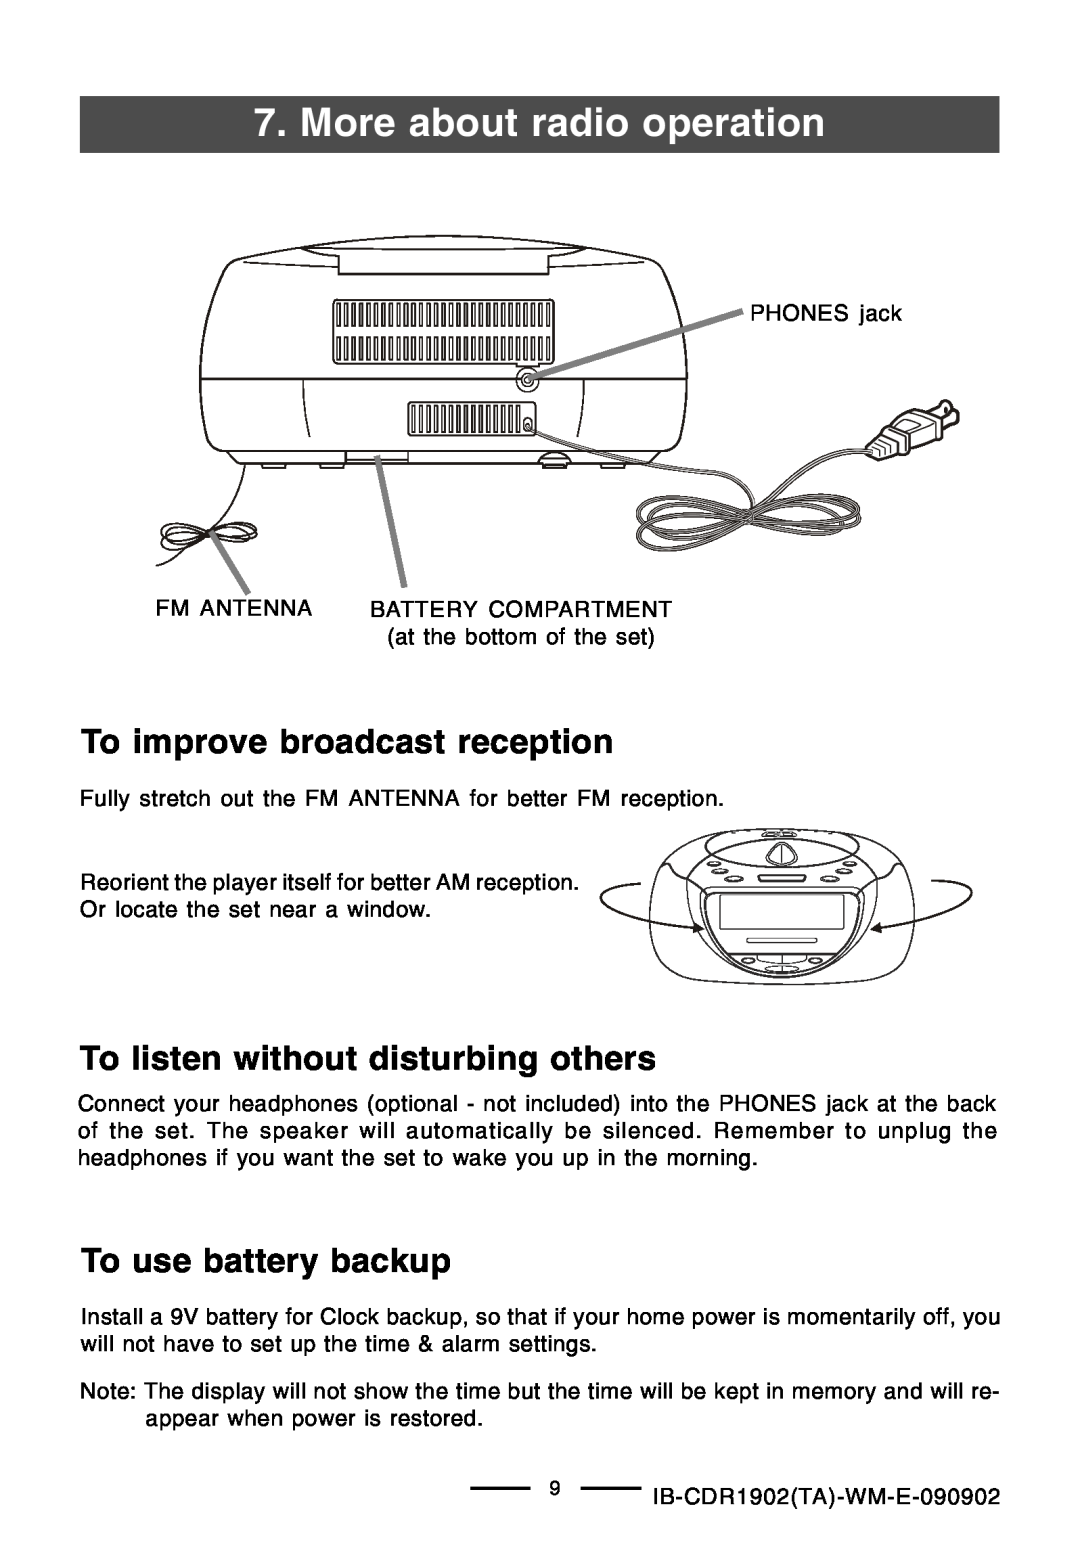 Lenoxx Electronics CDR-1902 To improve broadcast reception, To listen without disturbing others, To use battery backup 